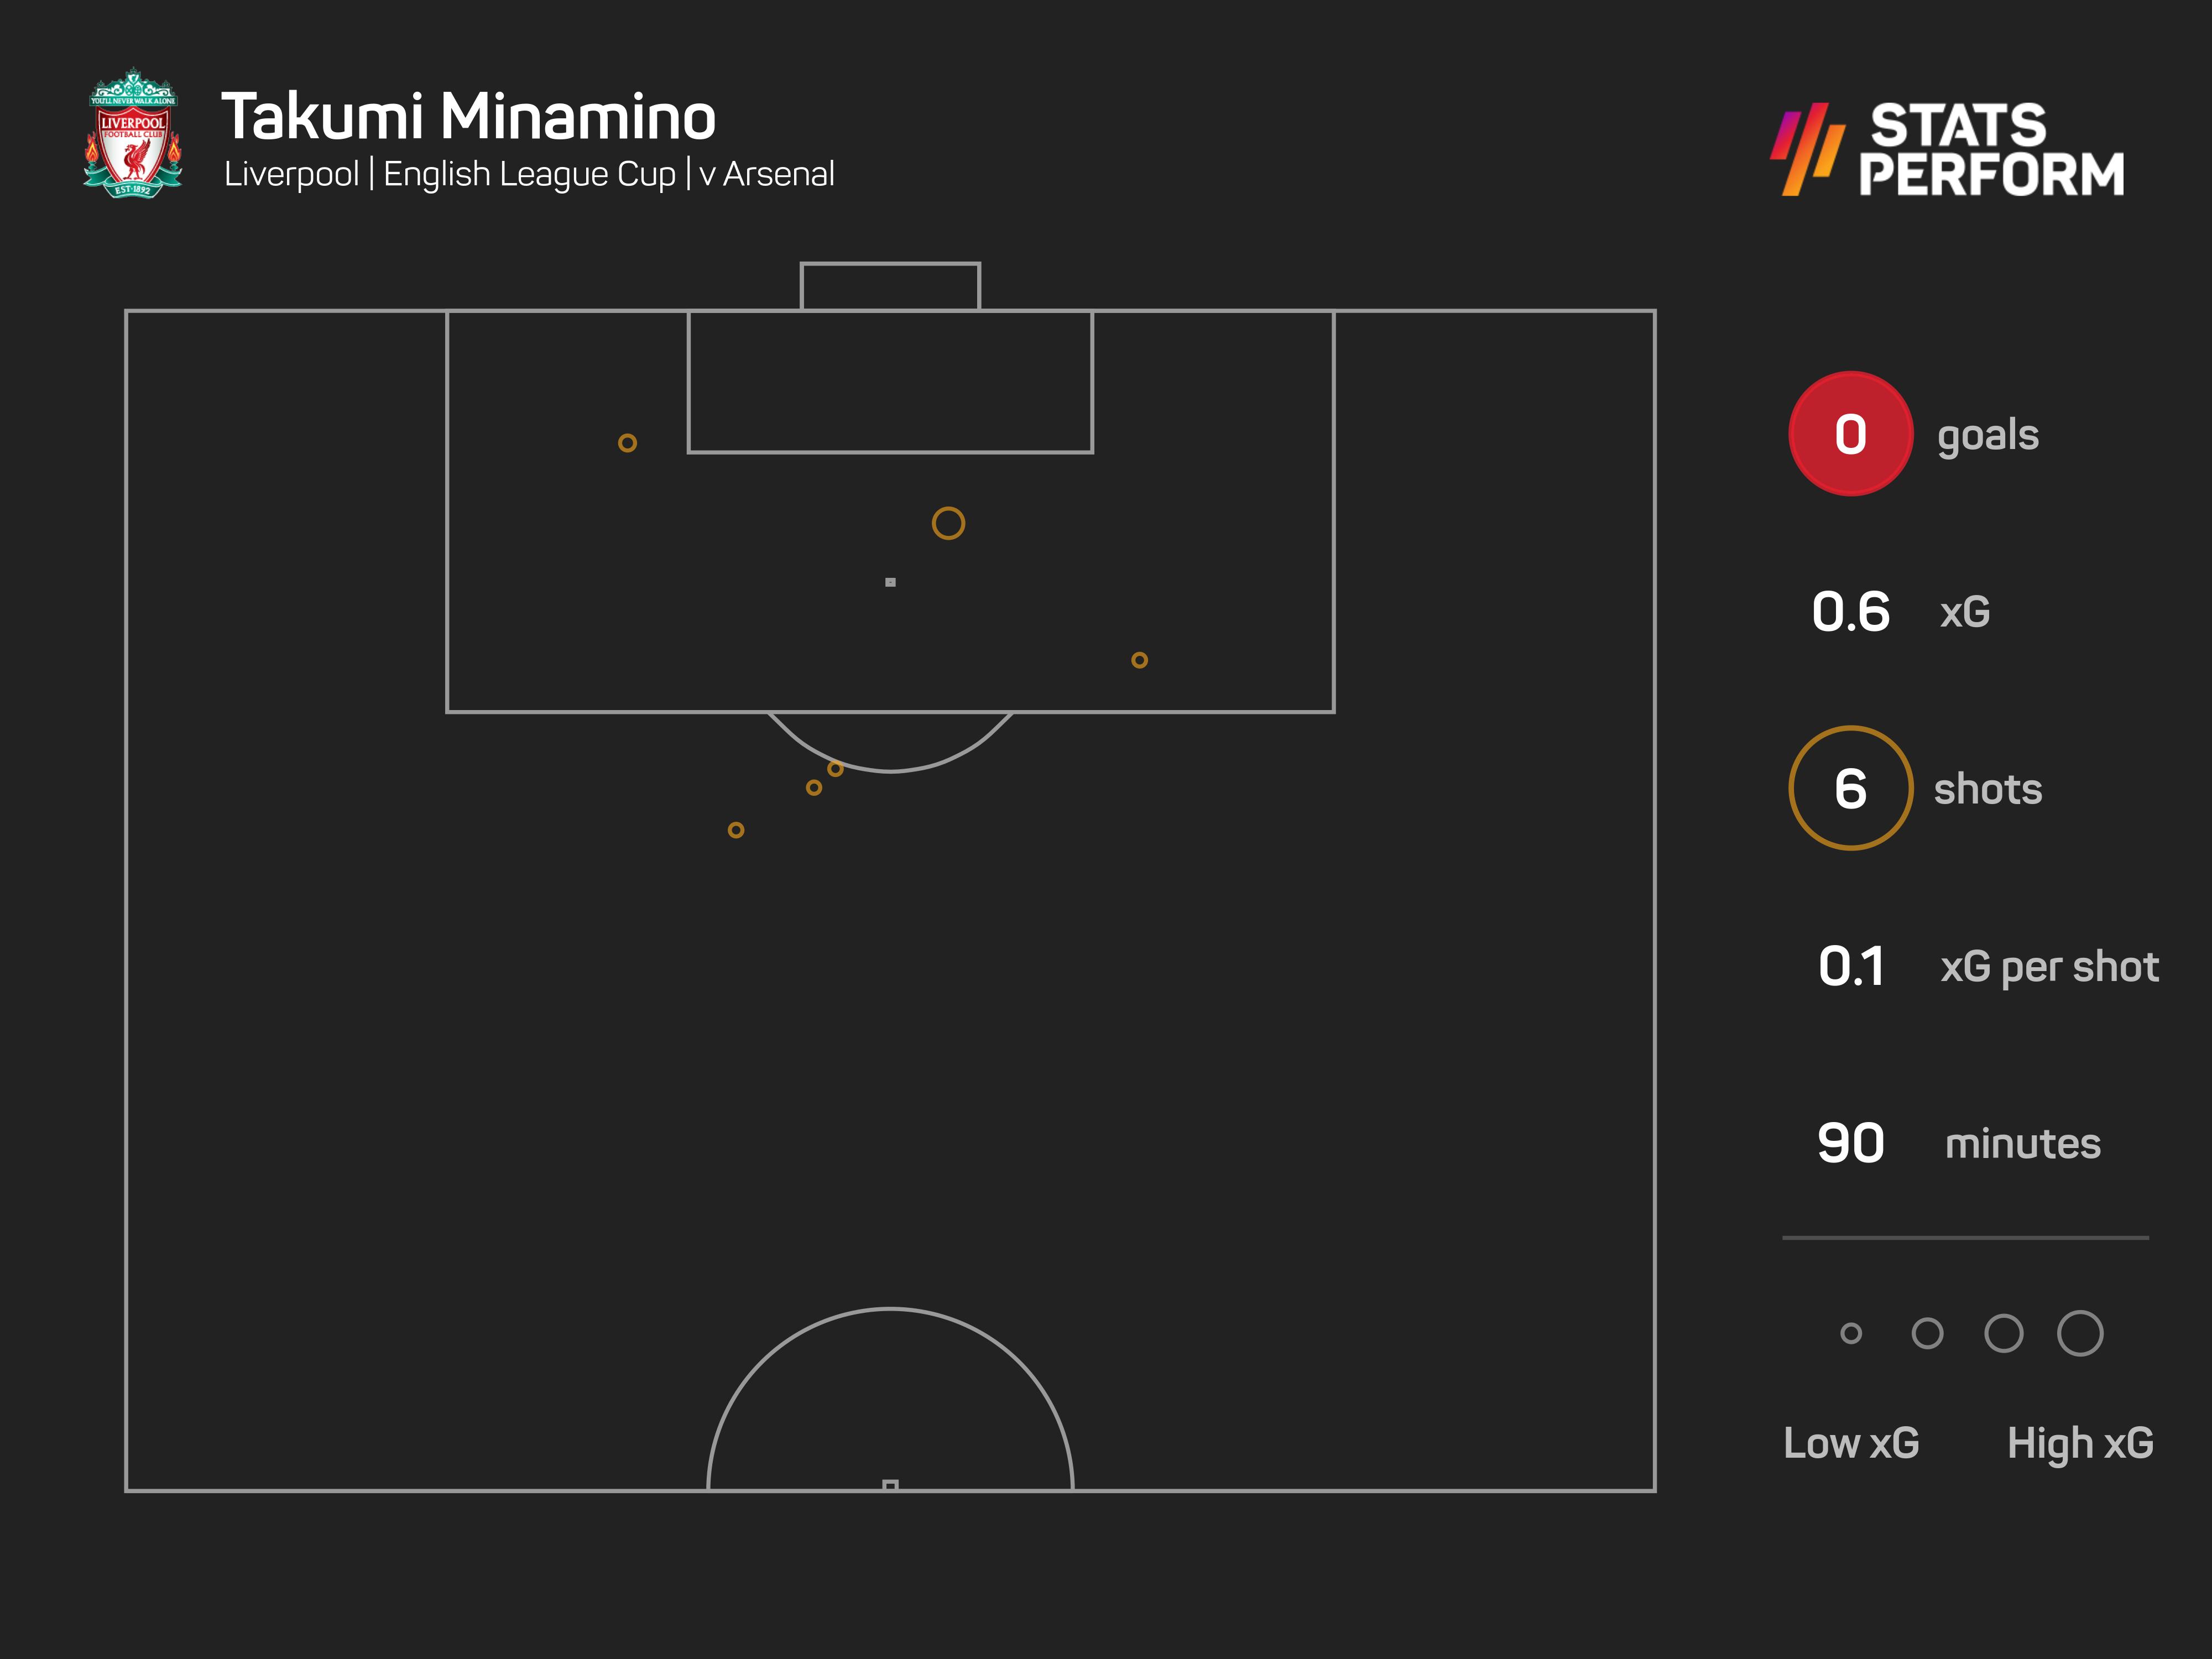 Takumi Minamino had six attempts against Arsenal, but did not hit the target